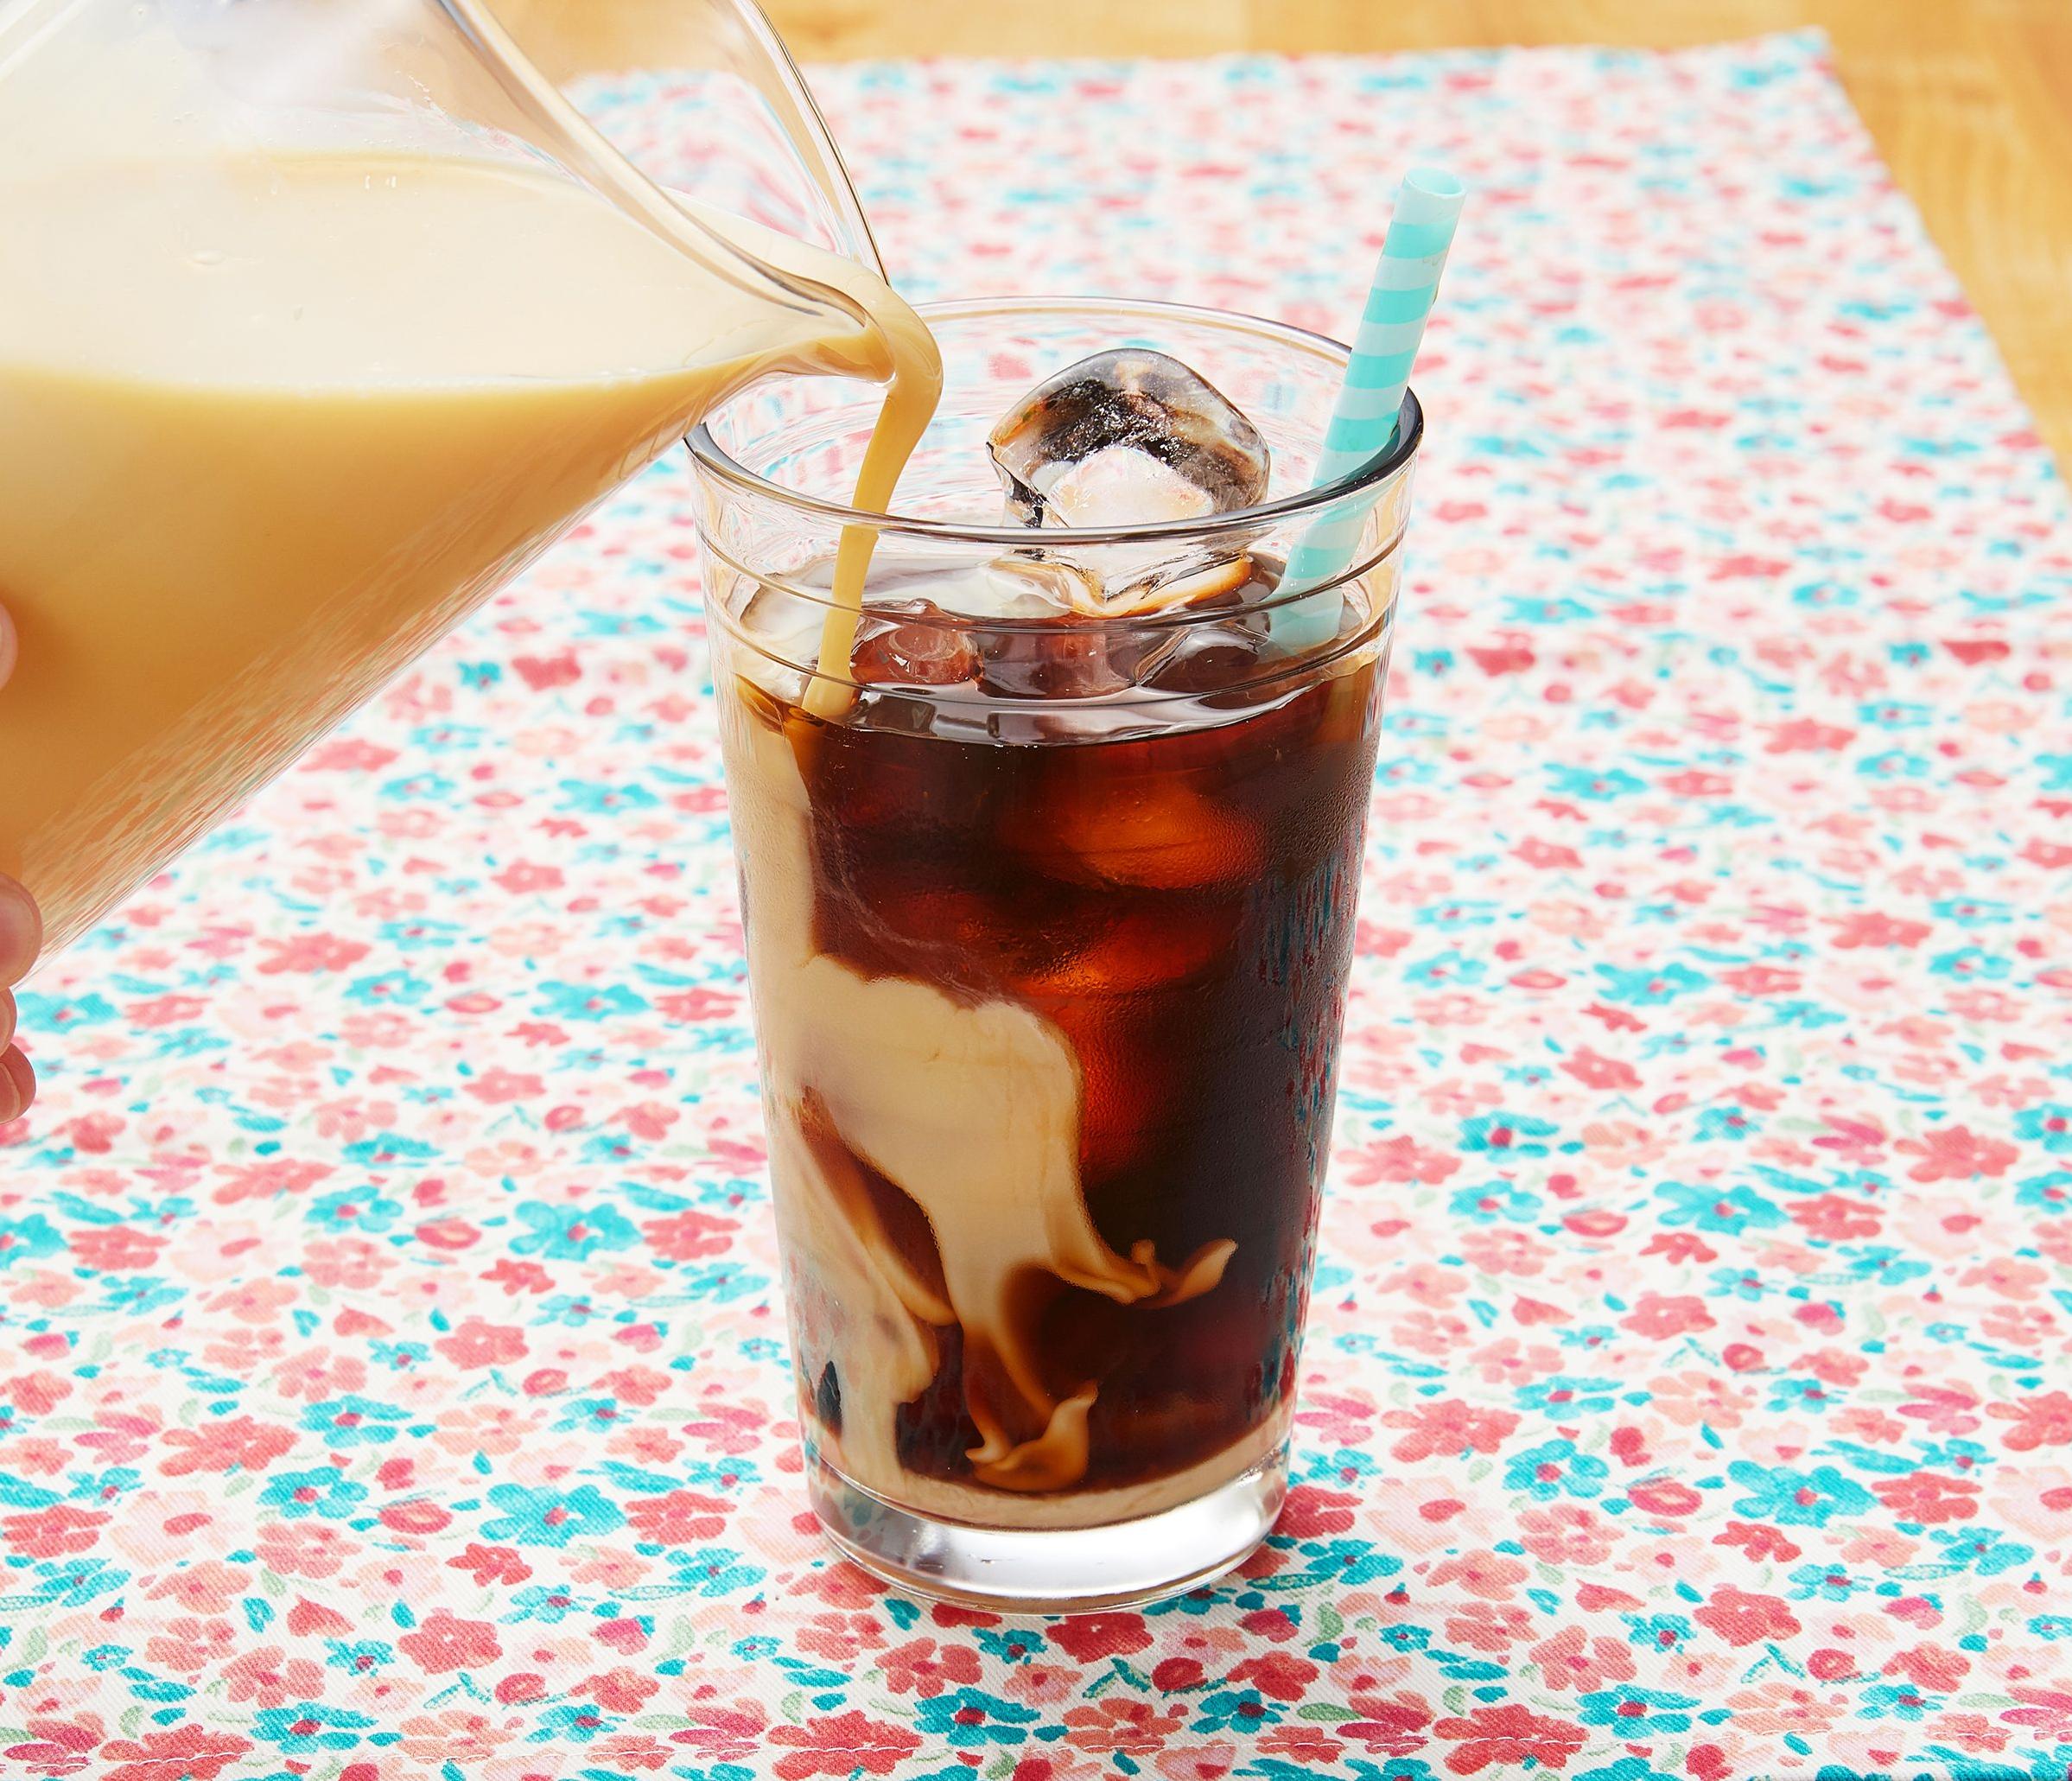  Don't let the heat bring you down, make yourself a glass of iced coffee today.